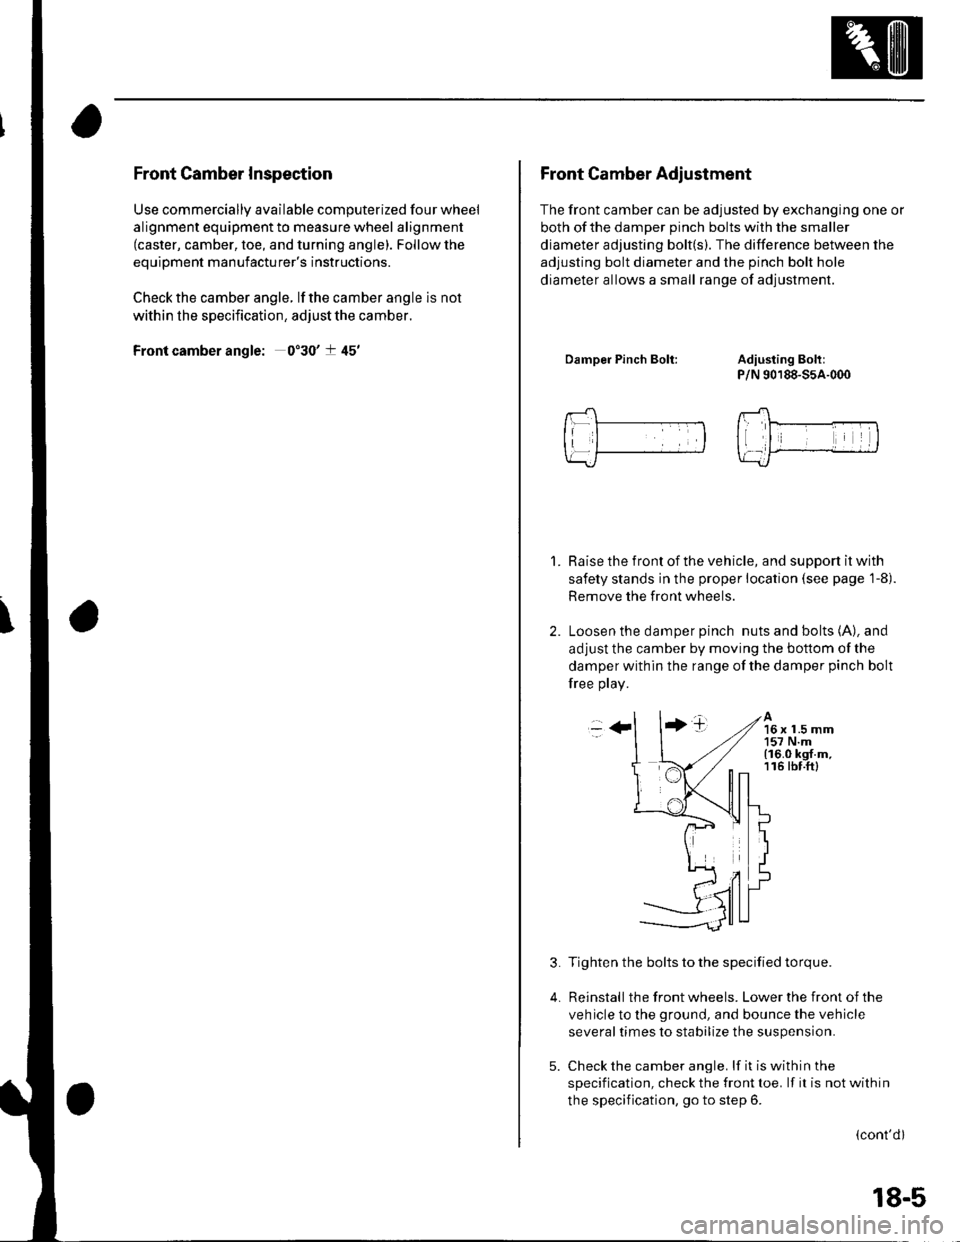 HONDA CIVIC 2003 7.G Workshop Manual Front Camber Inspection
Use commercially available computerized four wheel
alignment equipment to measure wheel alignment(caster, camber, toe, and turning angle). Follow the
equipment manufacturers i